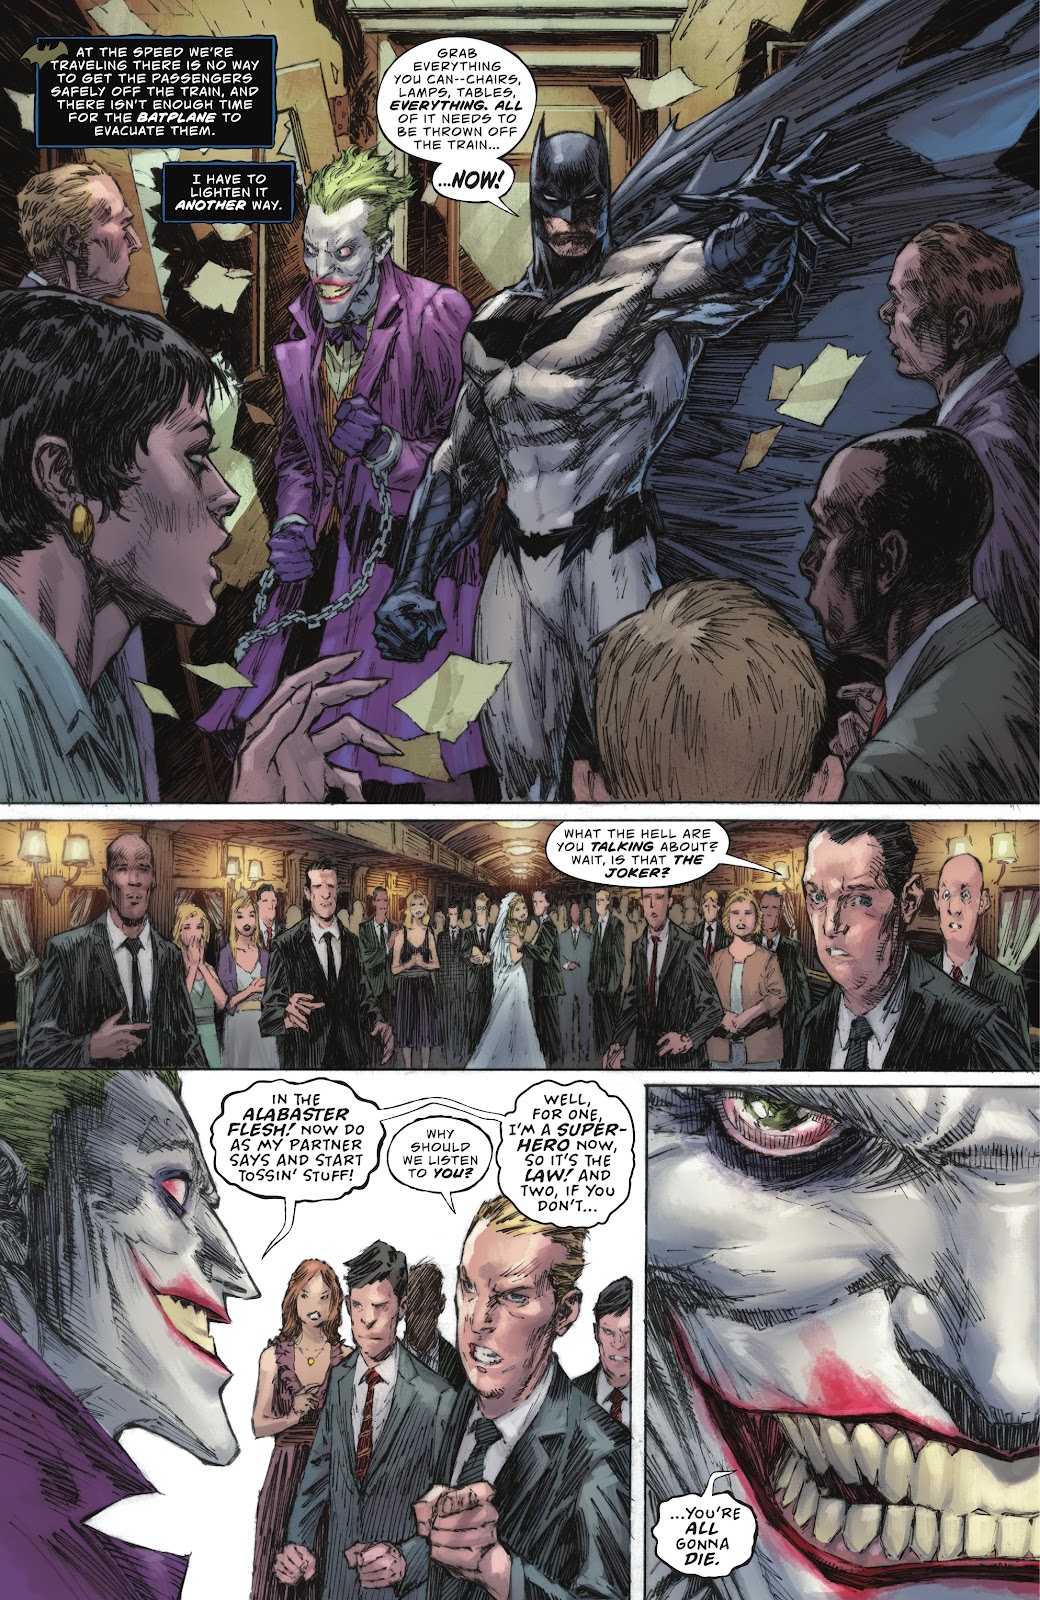 Batman & The Joker: The Deadly Duo issue 4 - Page 16